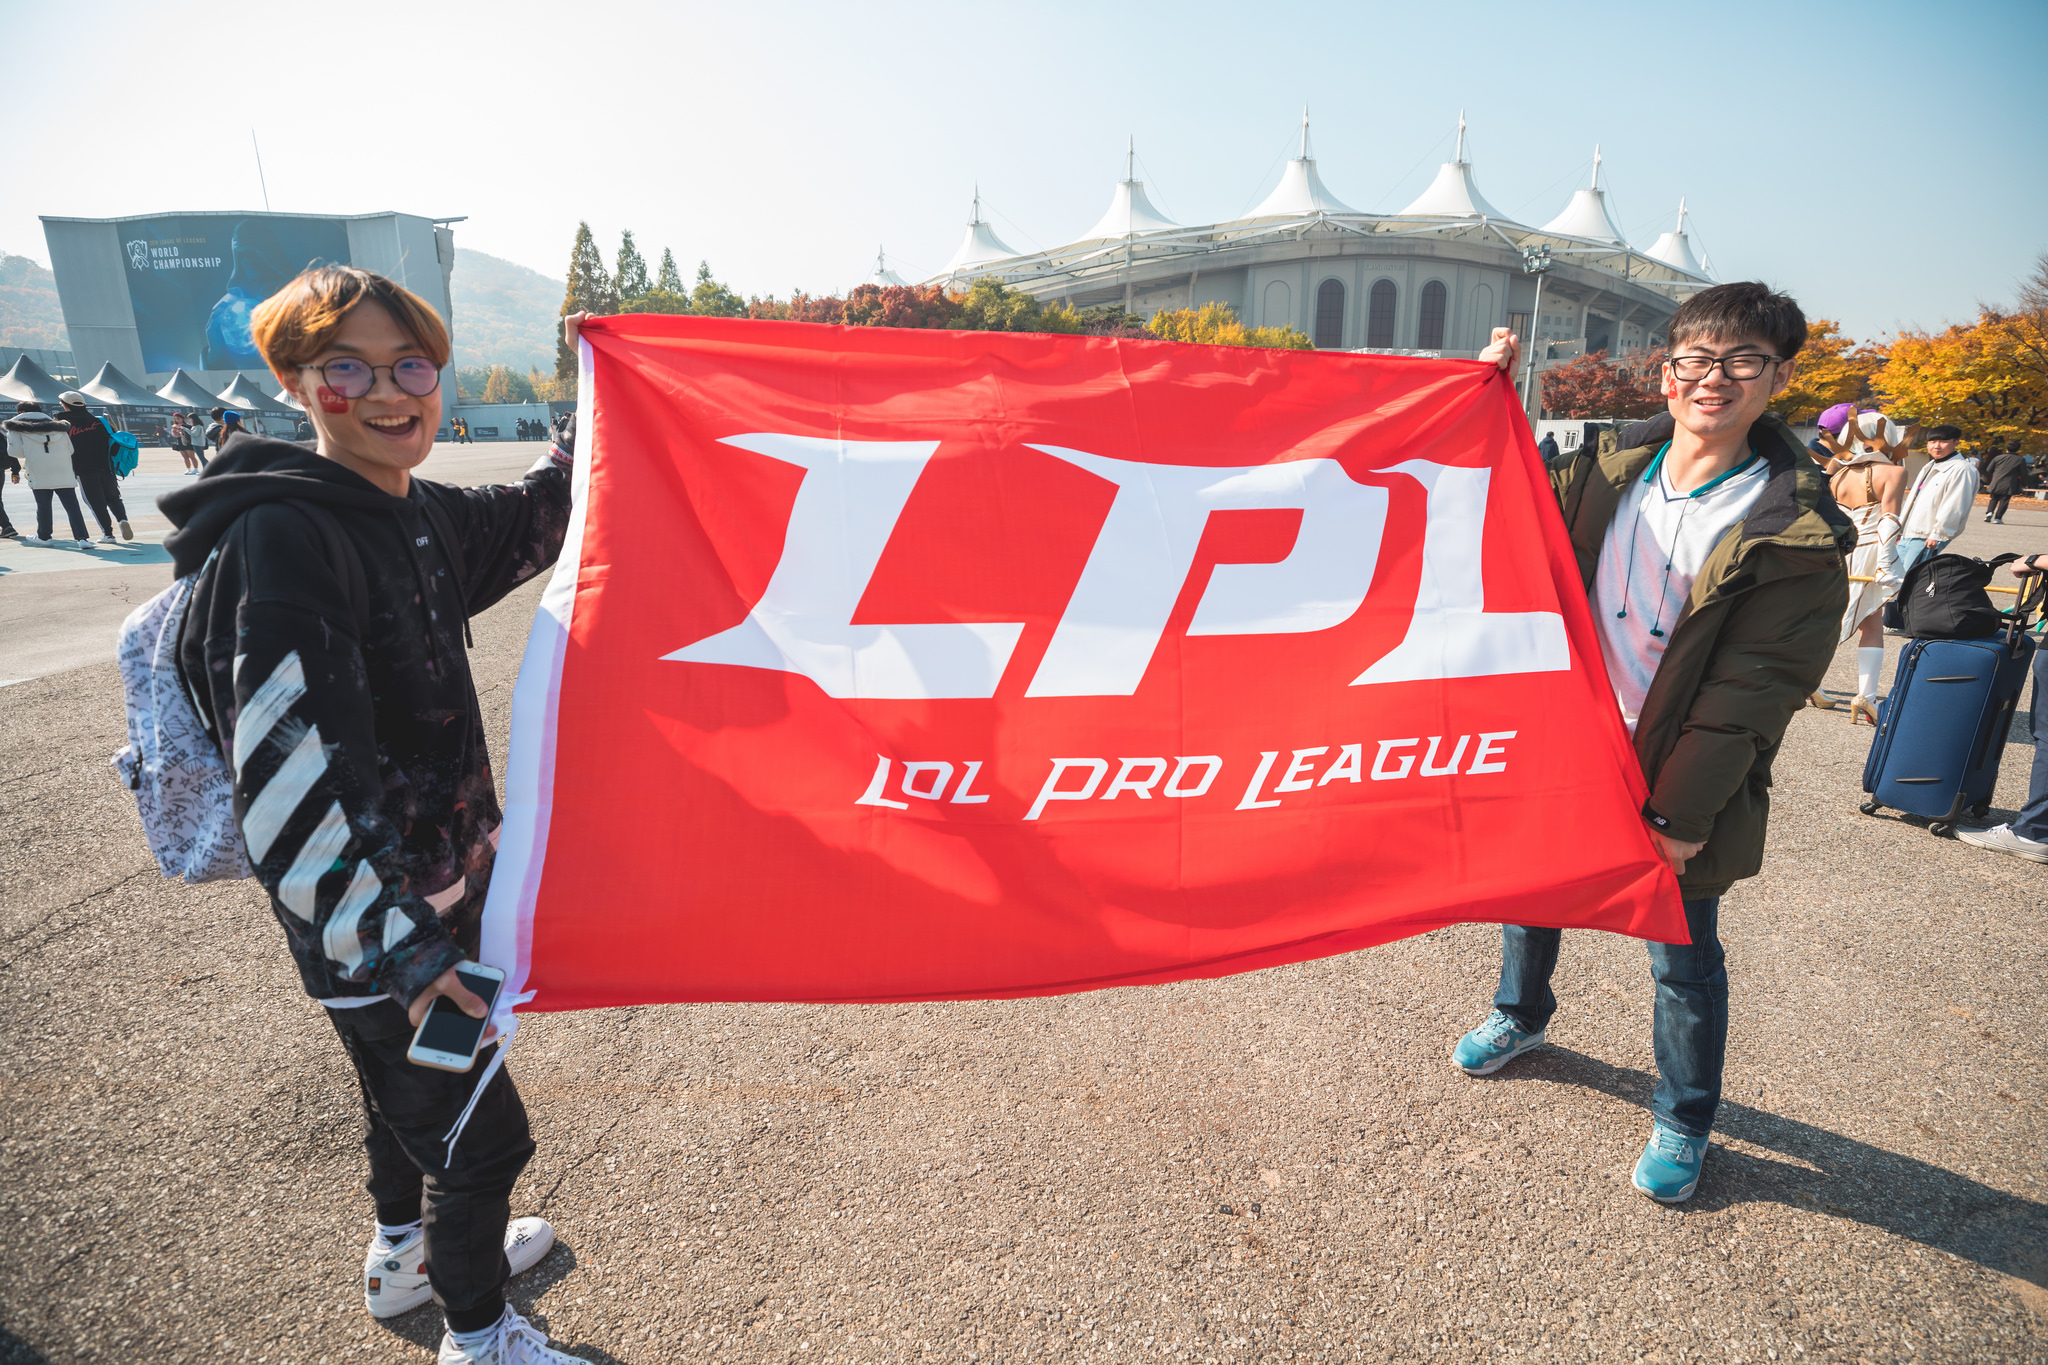 LPL – The Chinese League Pro League Is Looking To Cap The Salary Given To Players Based On Performance